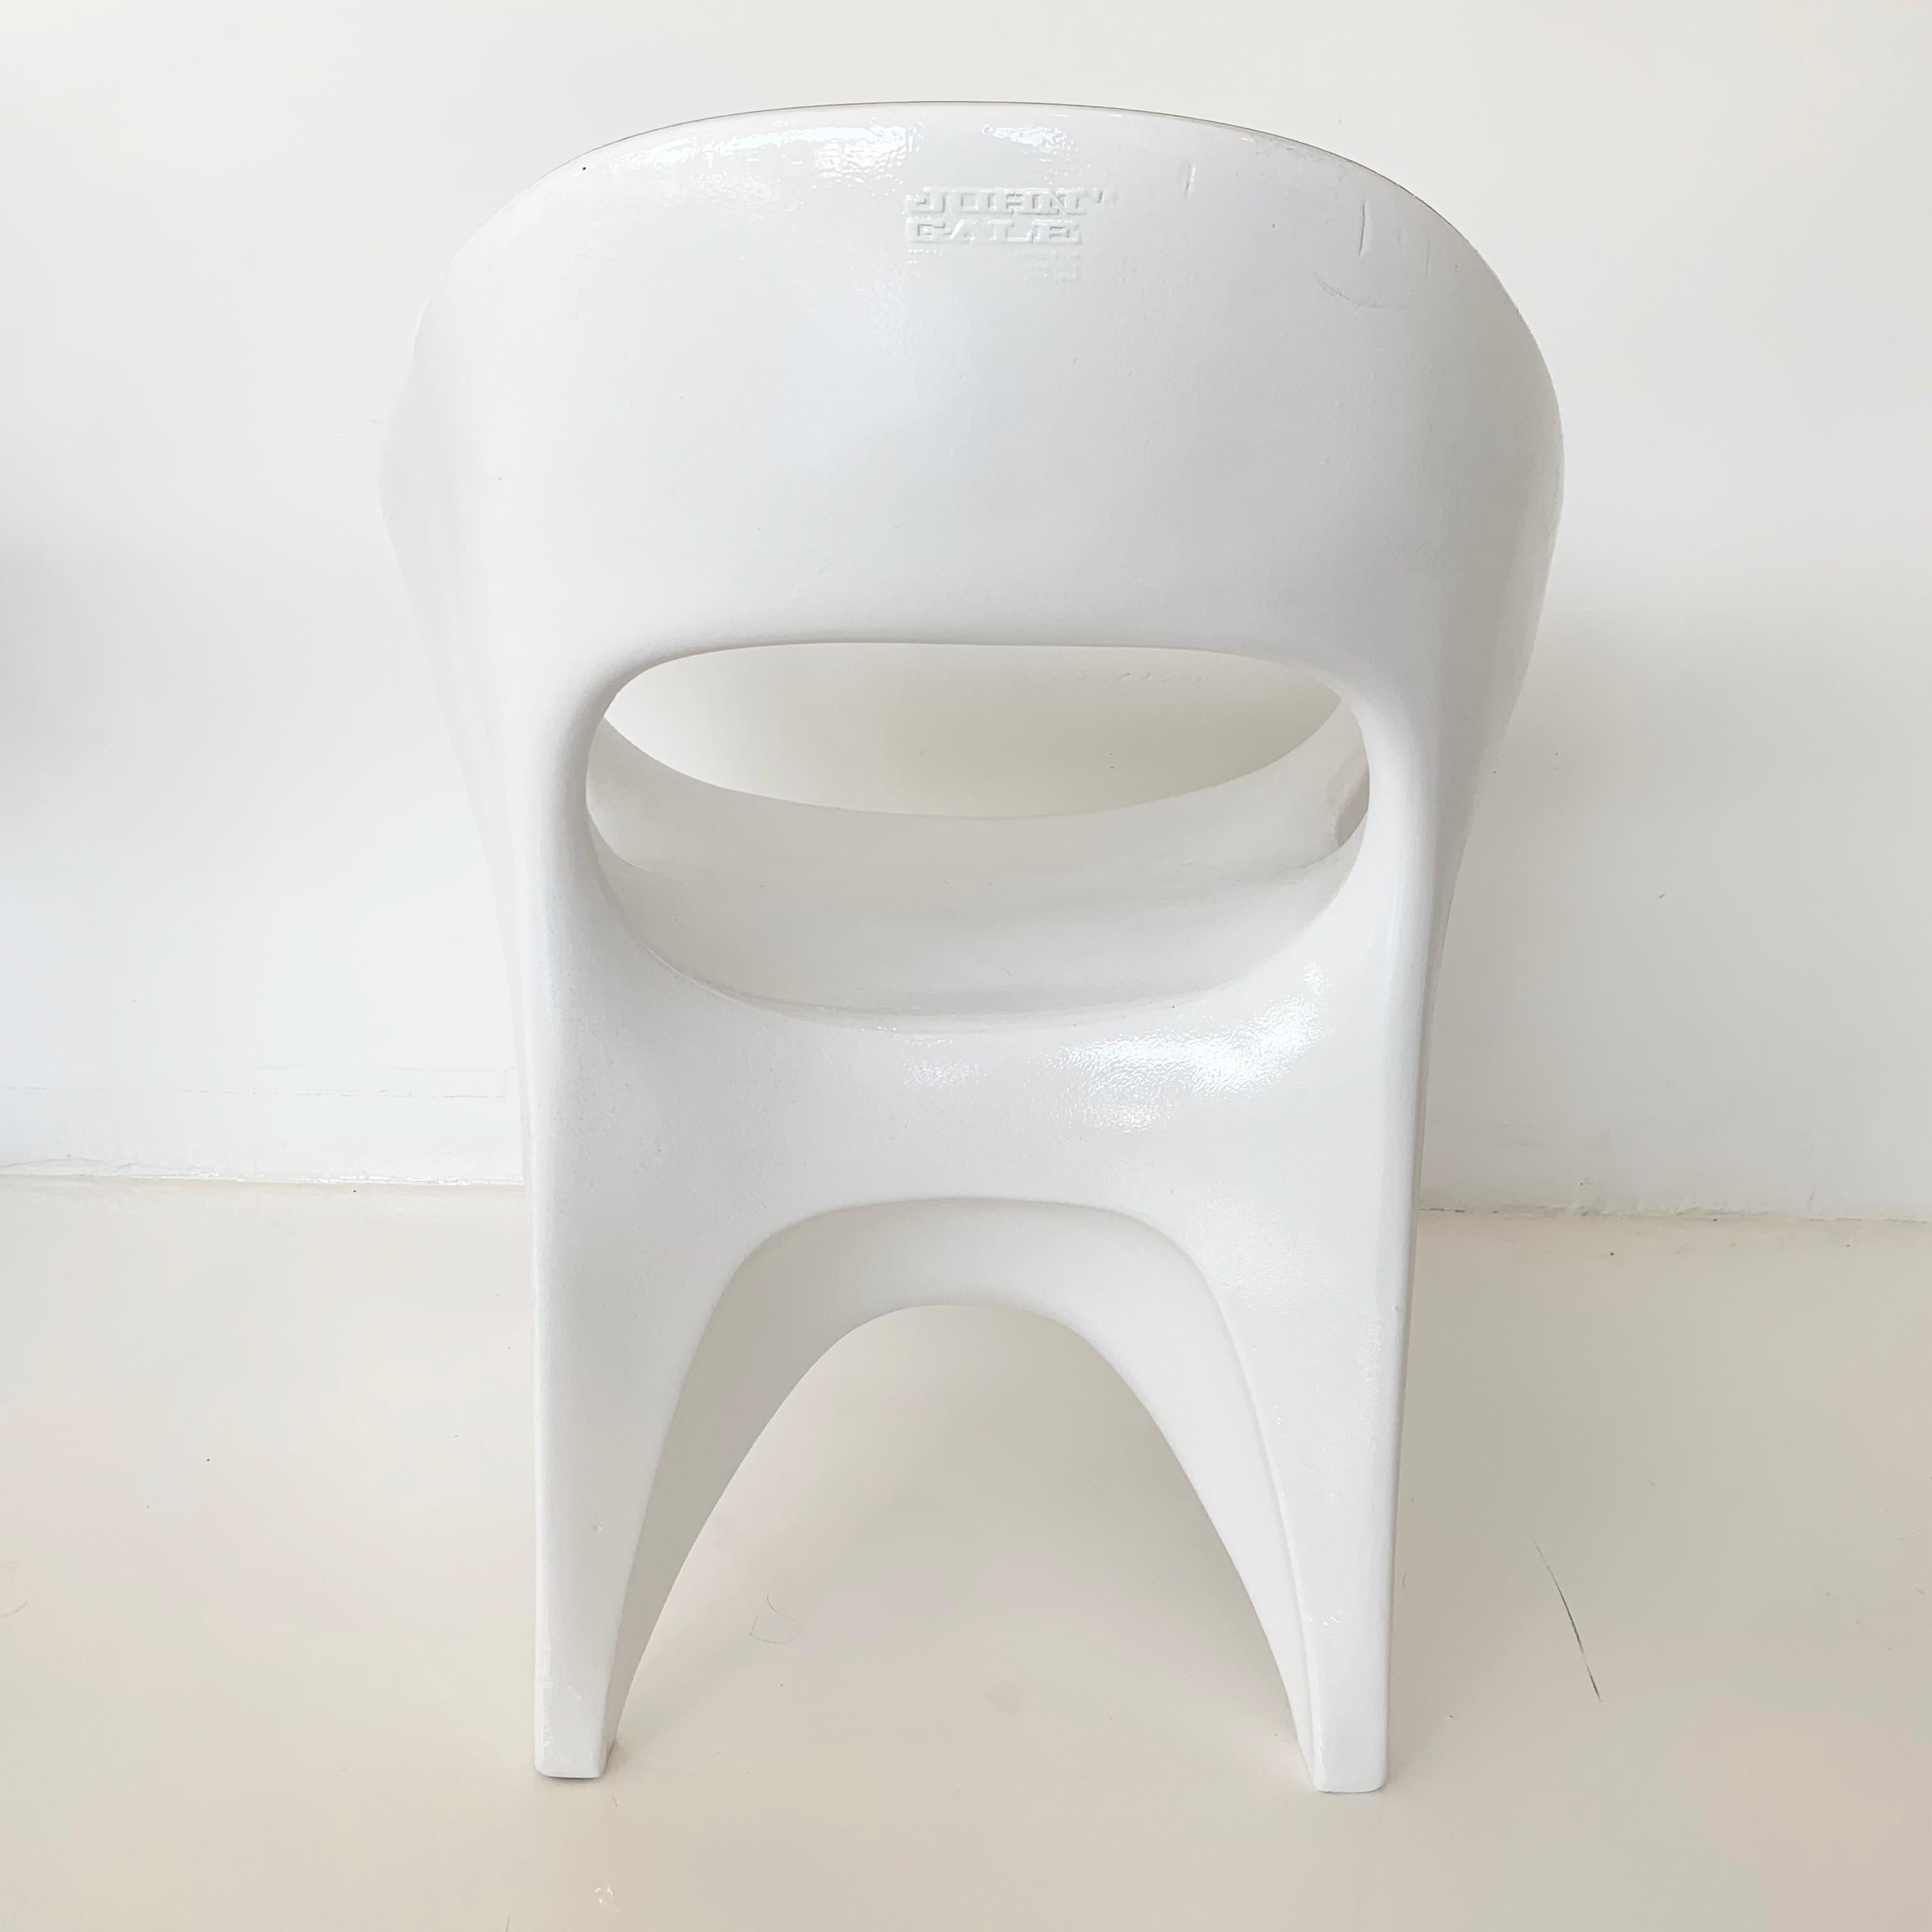 Set of 4 Sculptural Plastic Chairs by John Gale, 1963 For Sale 1